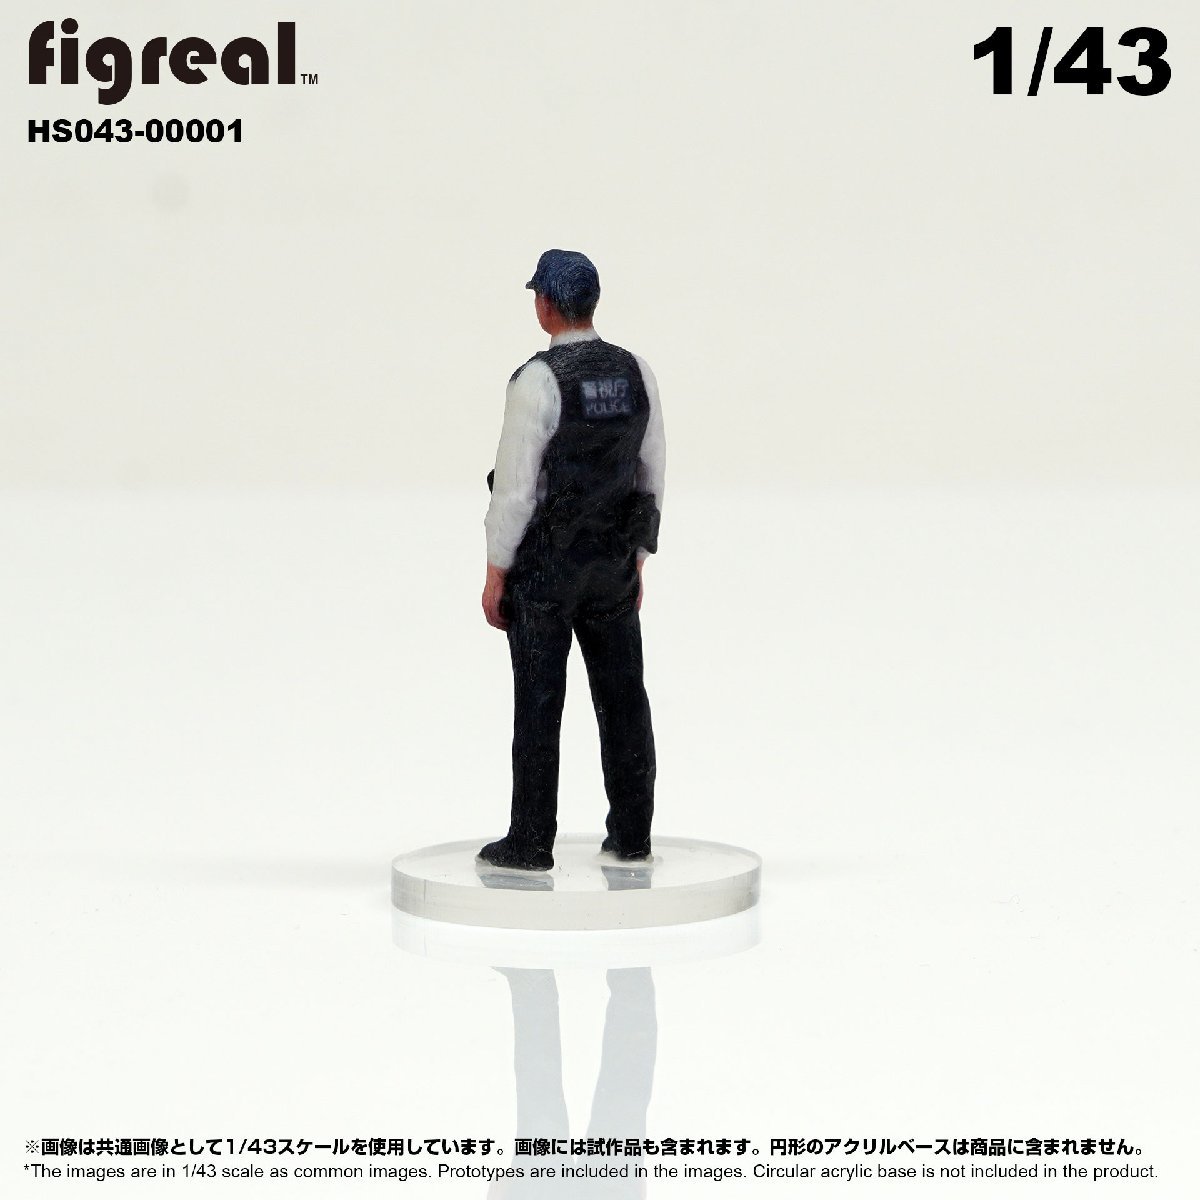 HS035-00001 figreal 日本警察官 1/35 高精細フィギュア_画像4